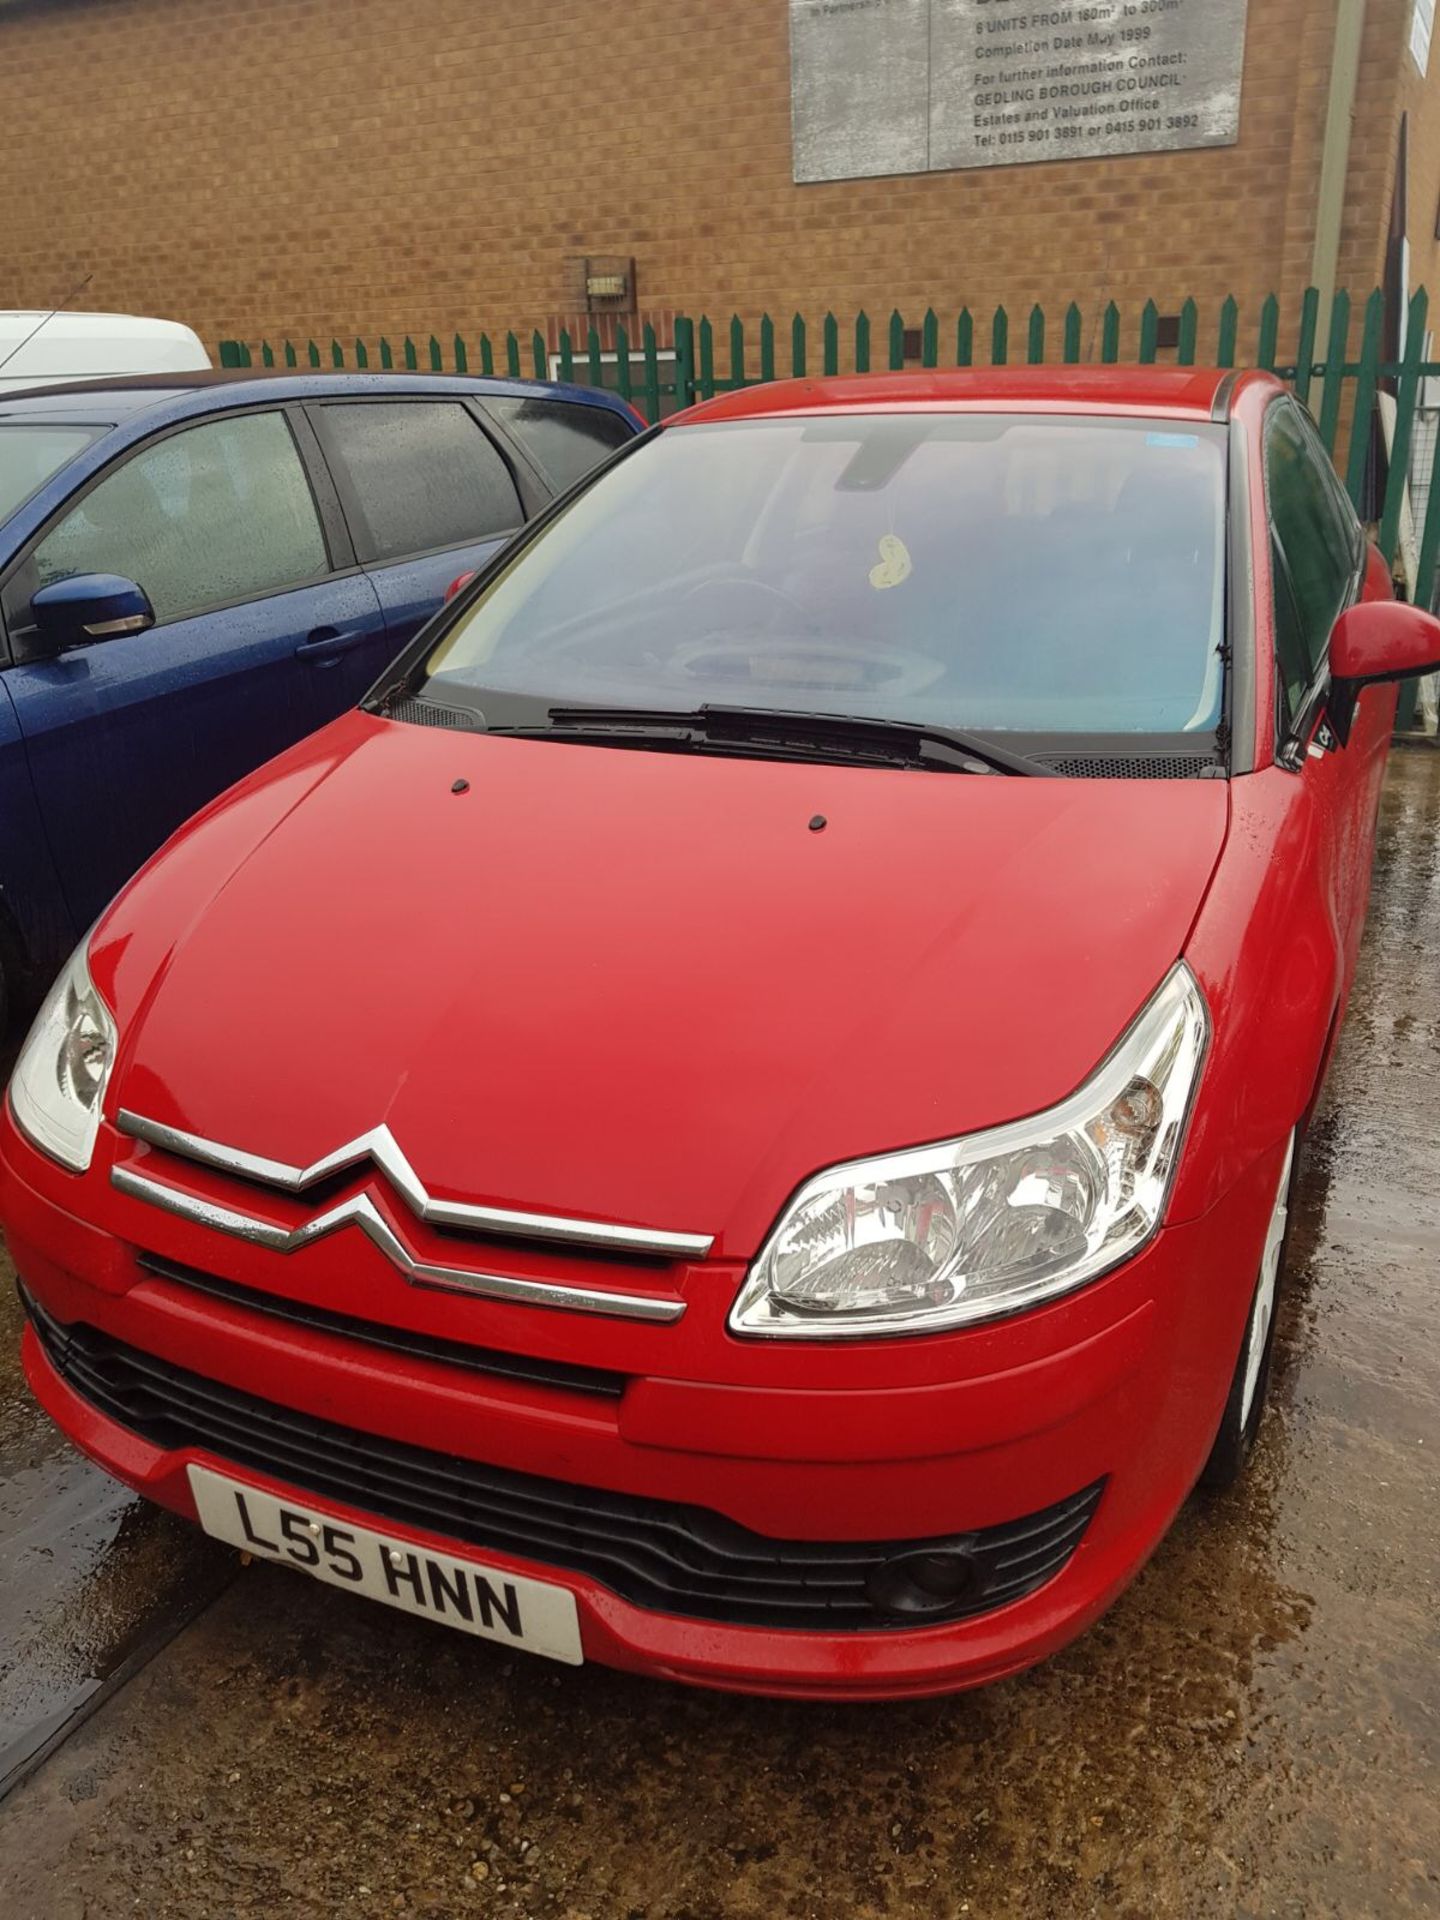 RARE 2008 CITROEN C4 LOEB HDI 110, NUMBER 231, SHOWING 3 FORMER KEEPERS - COLLECTORS /INVESTMENT - Image 3 of 19